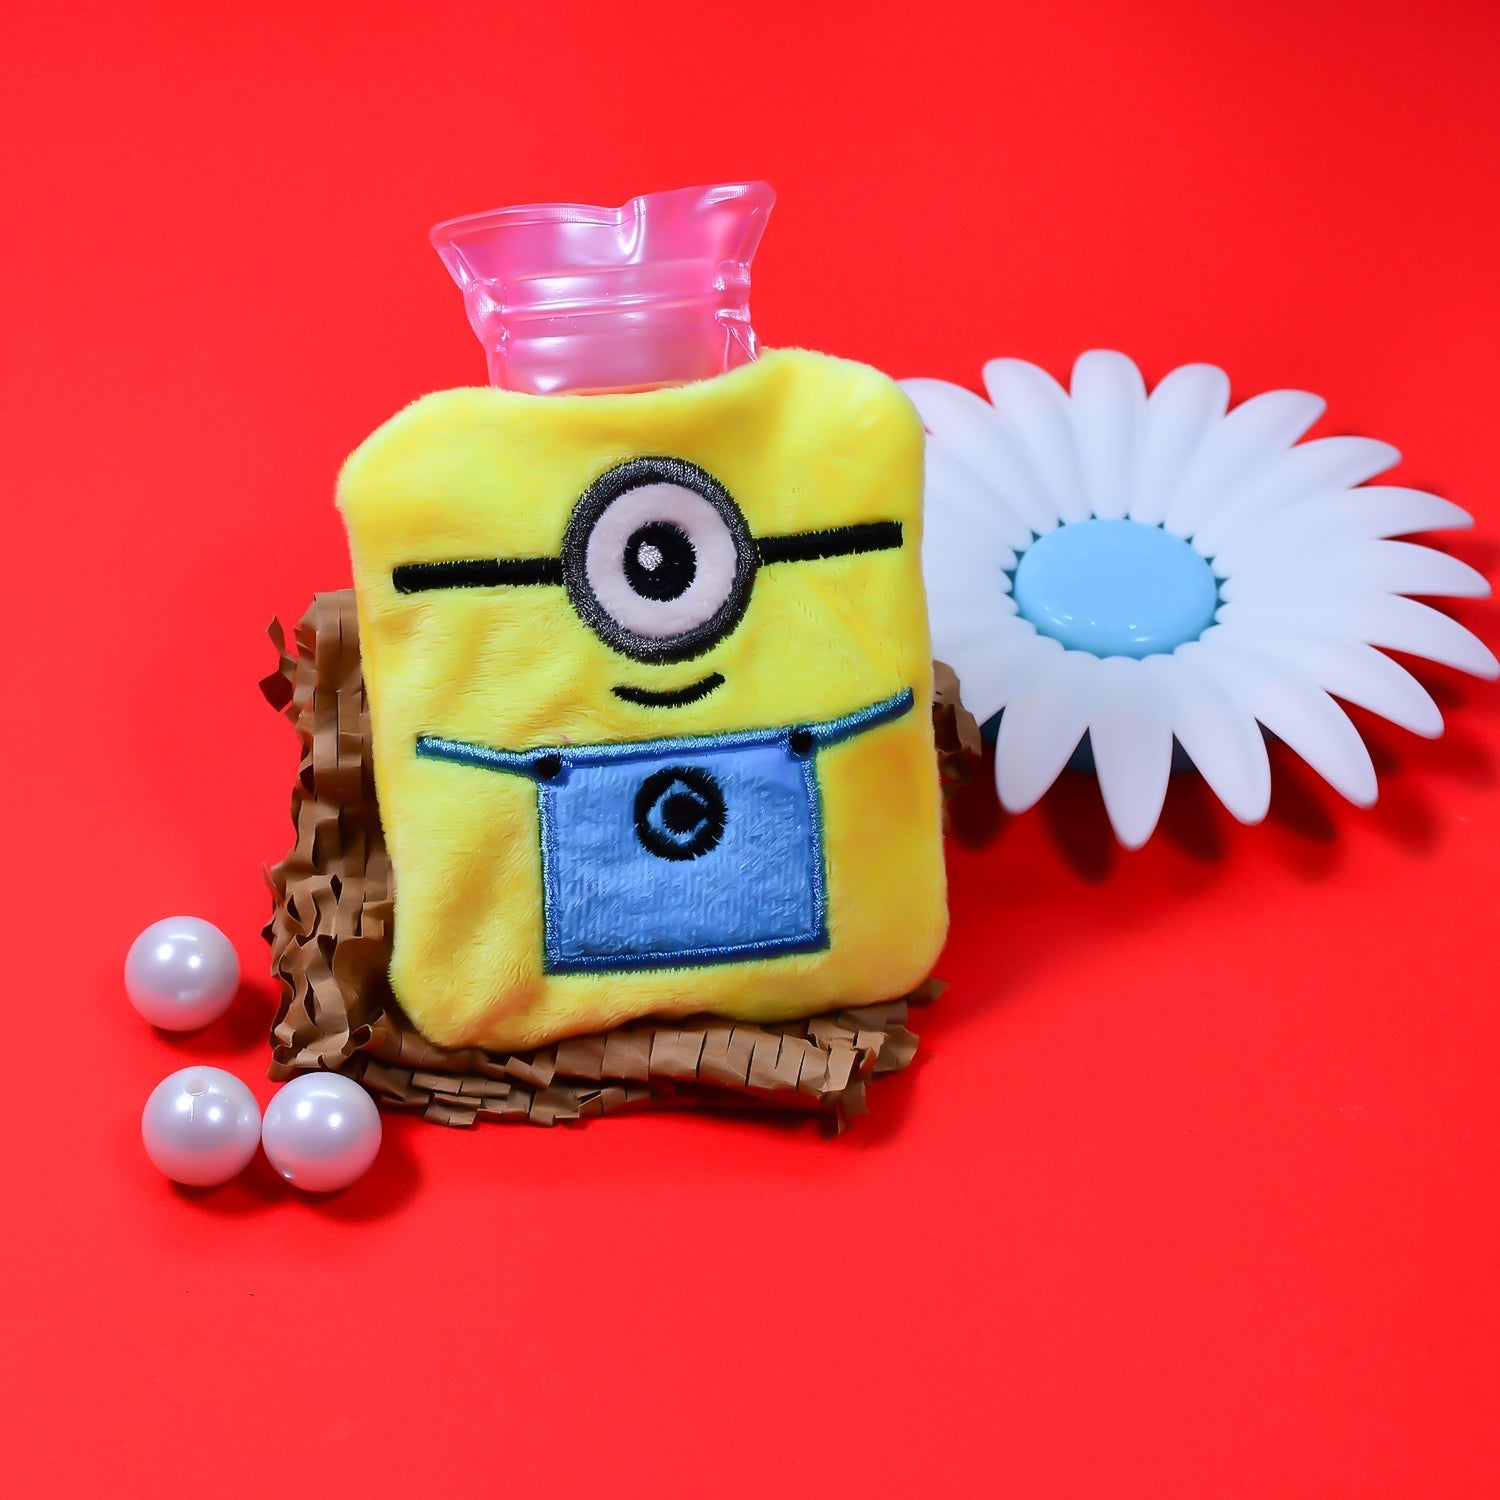 6506 Minions small Hot Water Bag with Cover for Pain Relief, Neck, Shoulder Pain and Hand, Feet Warmer, Menstrual Cramps. DeoDap